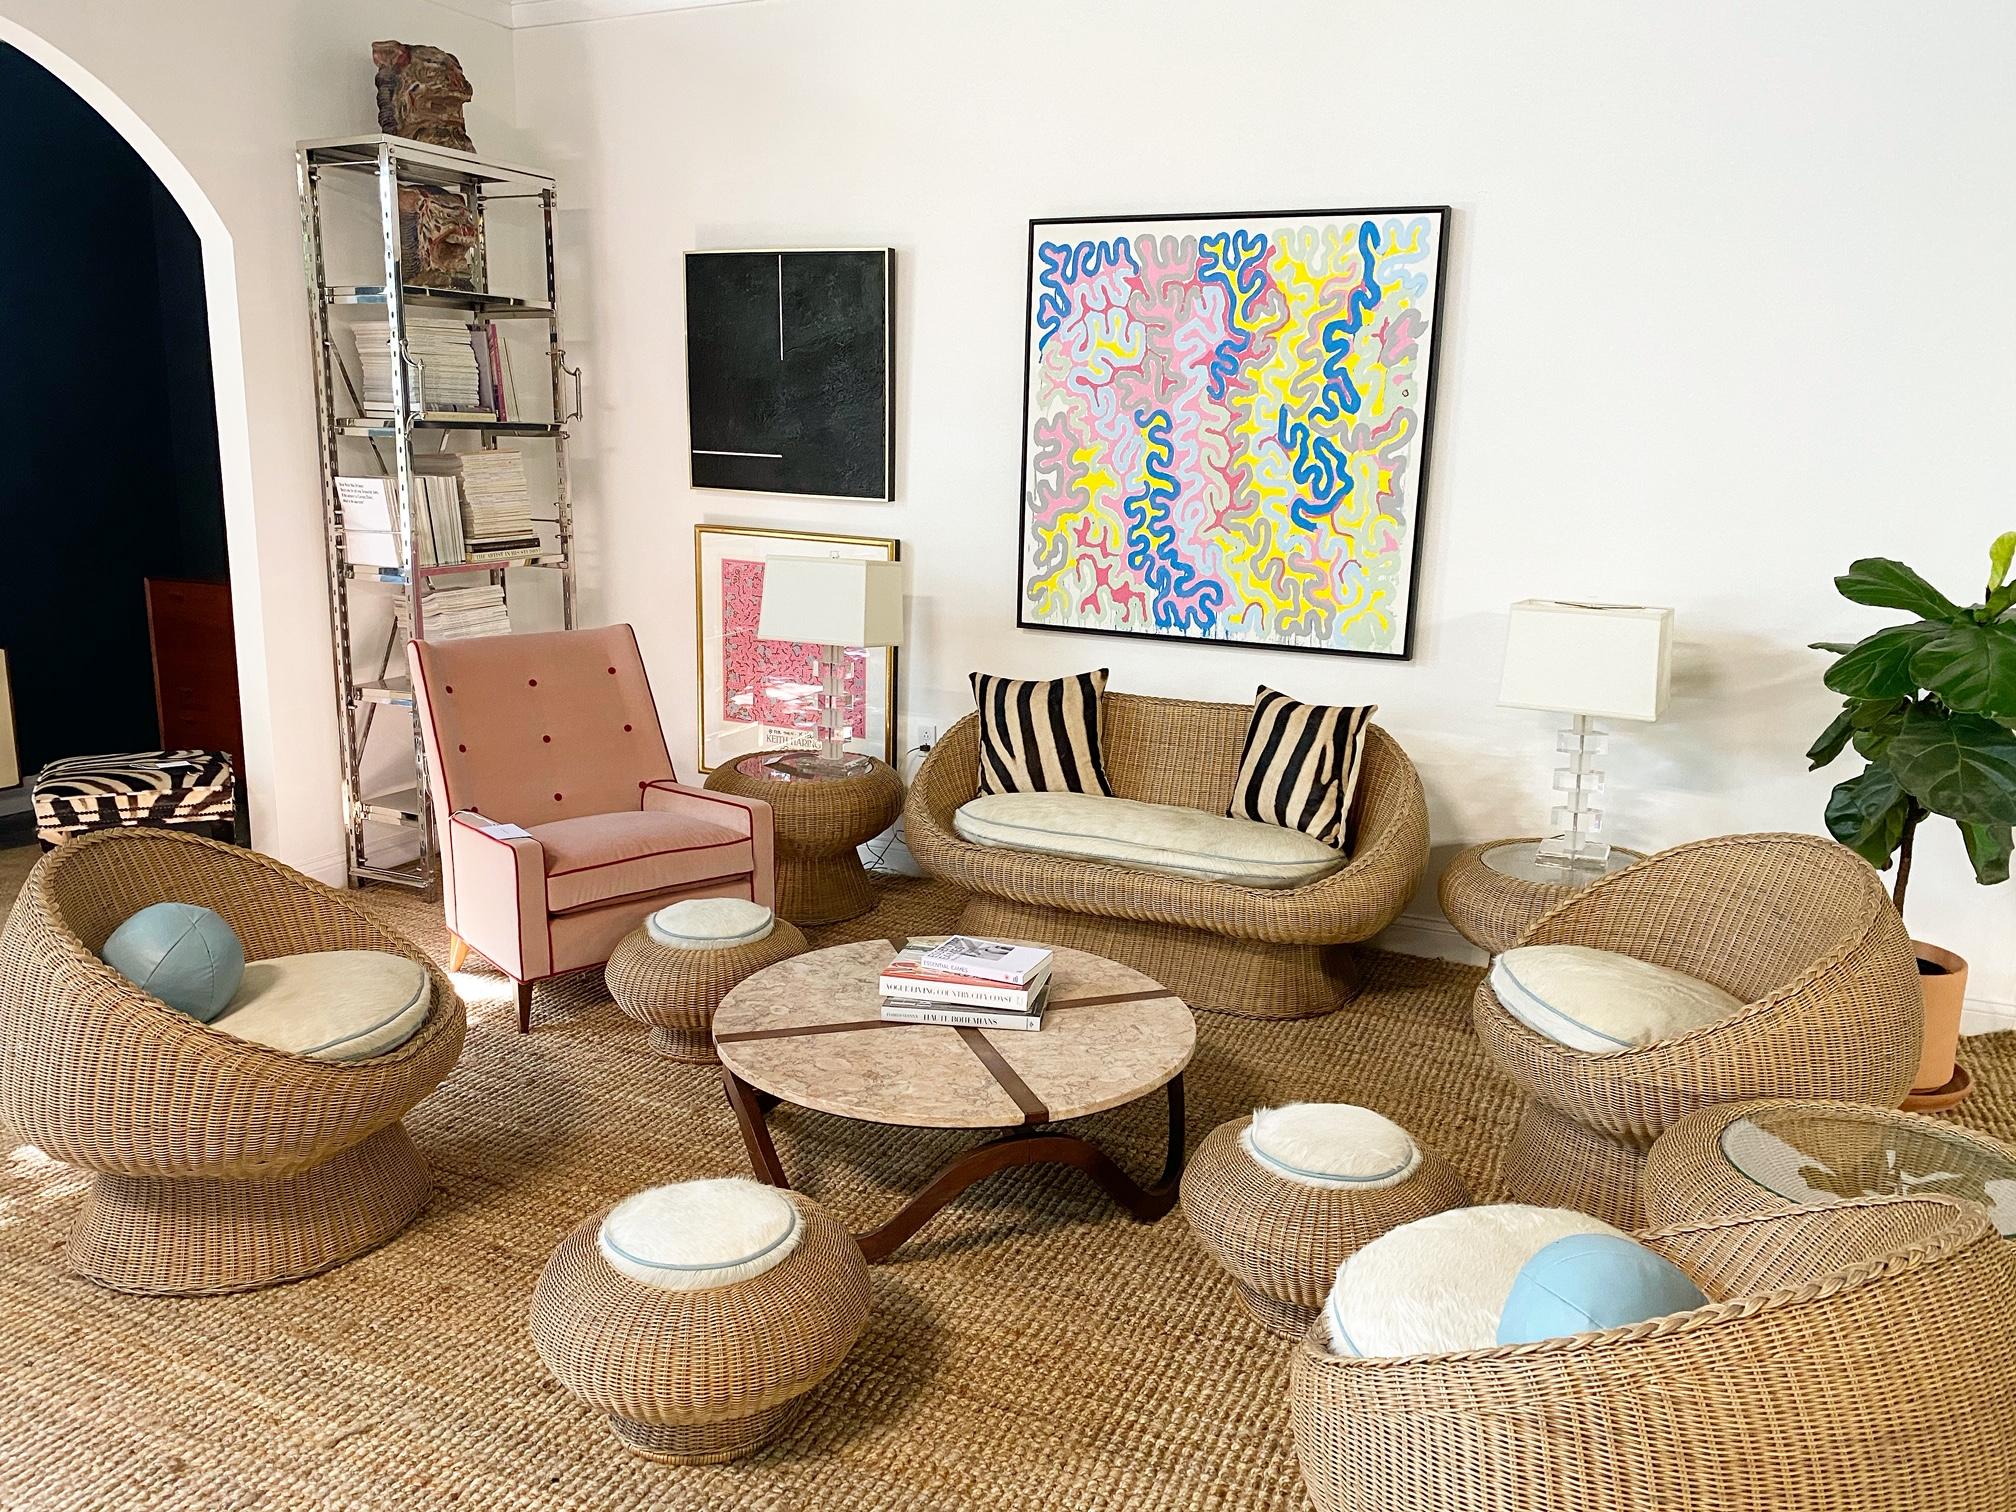 In the style of Eero Aarnio.

The romance of rattan! Homey, versatile, and always stylish. This set is comprised of a loveseat, three lounge chairs, three ottomans, and three side tables. Custom made Brazilian ivory cowhide cushions add warmth and